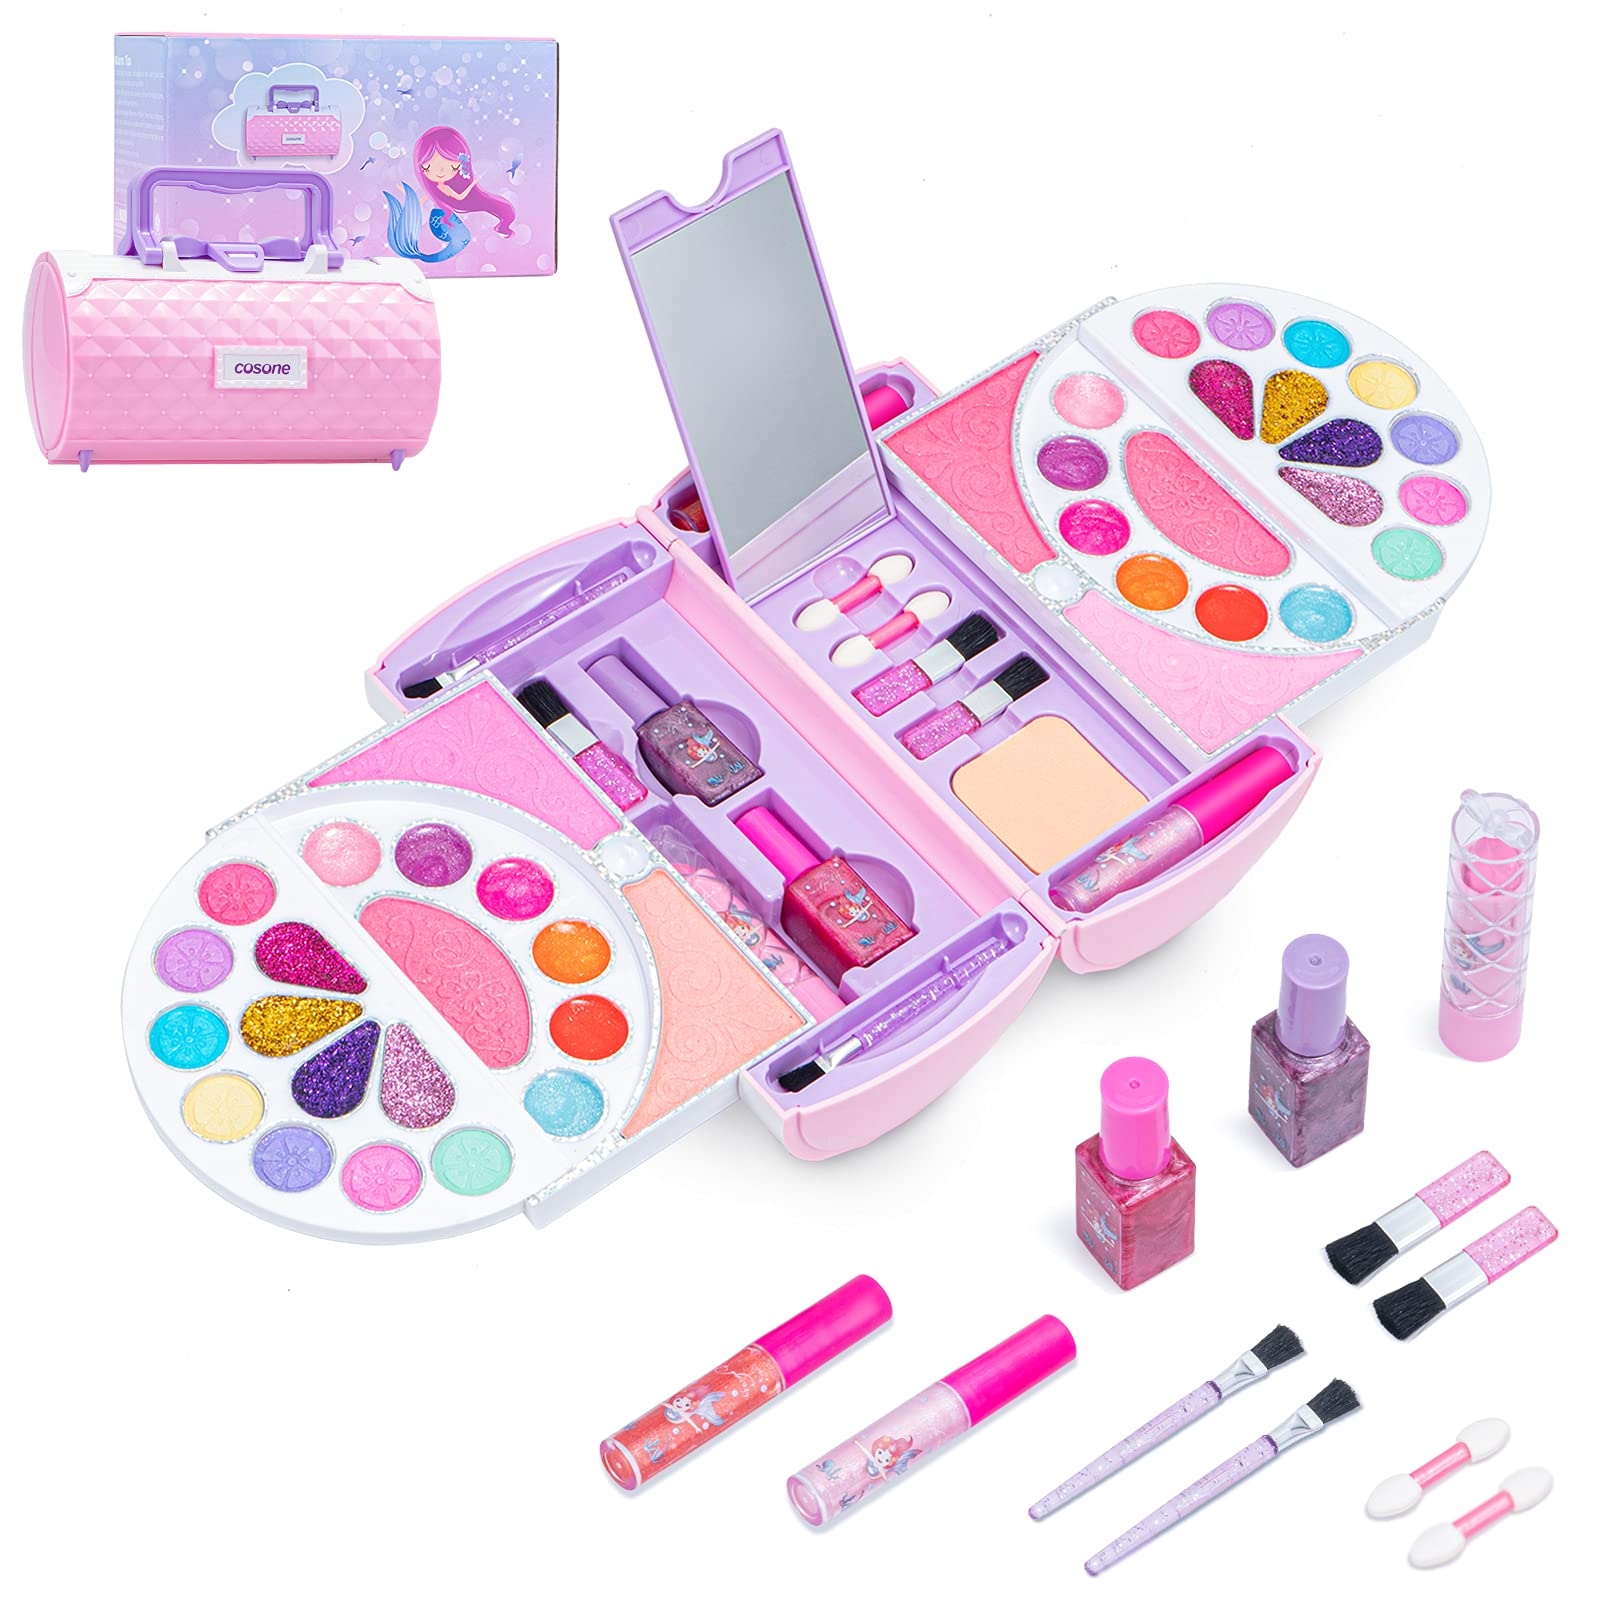 cosone Kids Makeup Kit 54 Pcs Real Cosmetic Make Up Set, Safty Tested Washable Makeup Toy Set with Portable Box for Girls Prentent Play Christmas Birthday Gift Toys